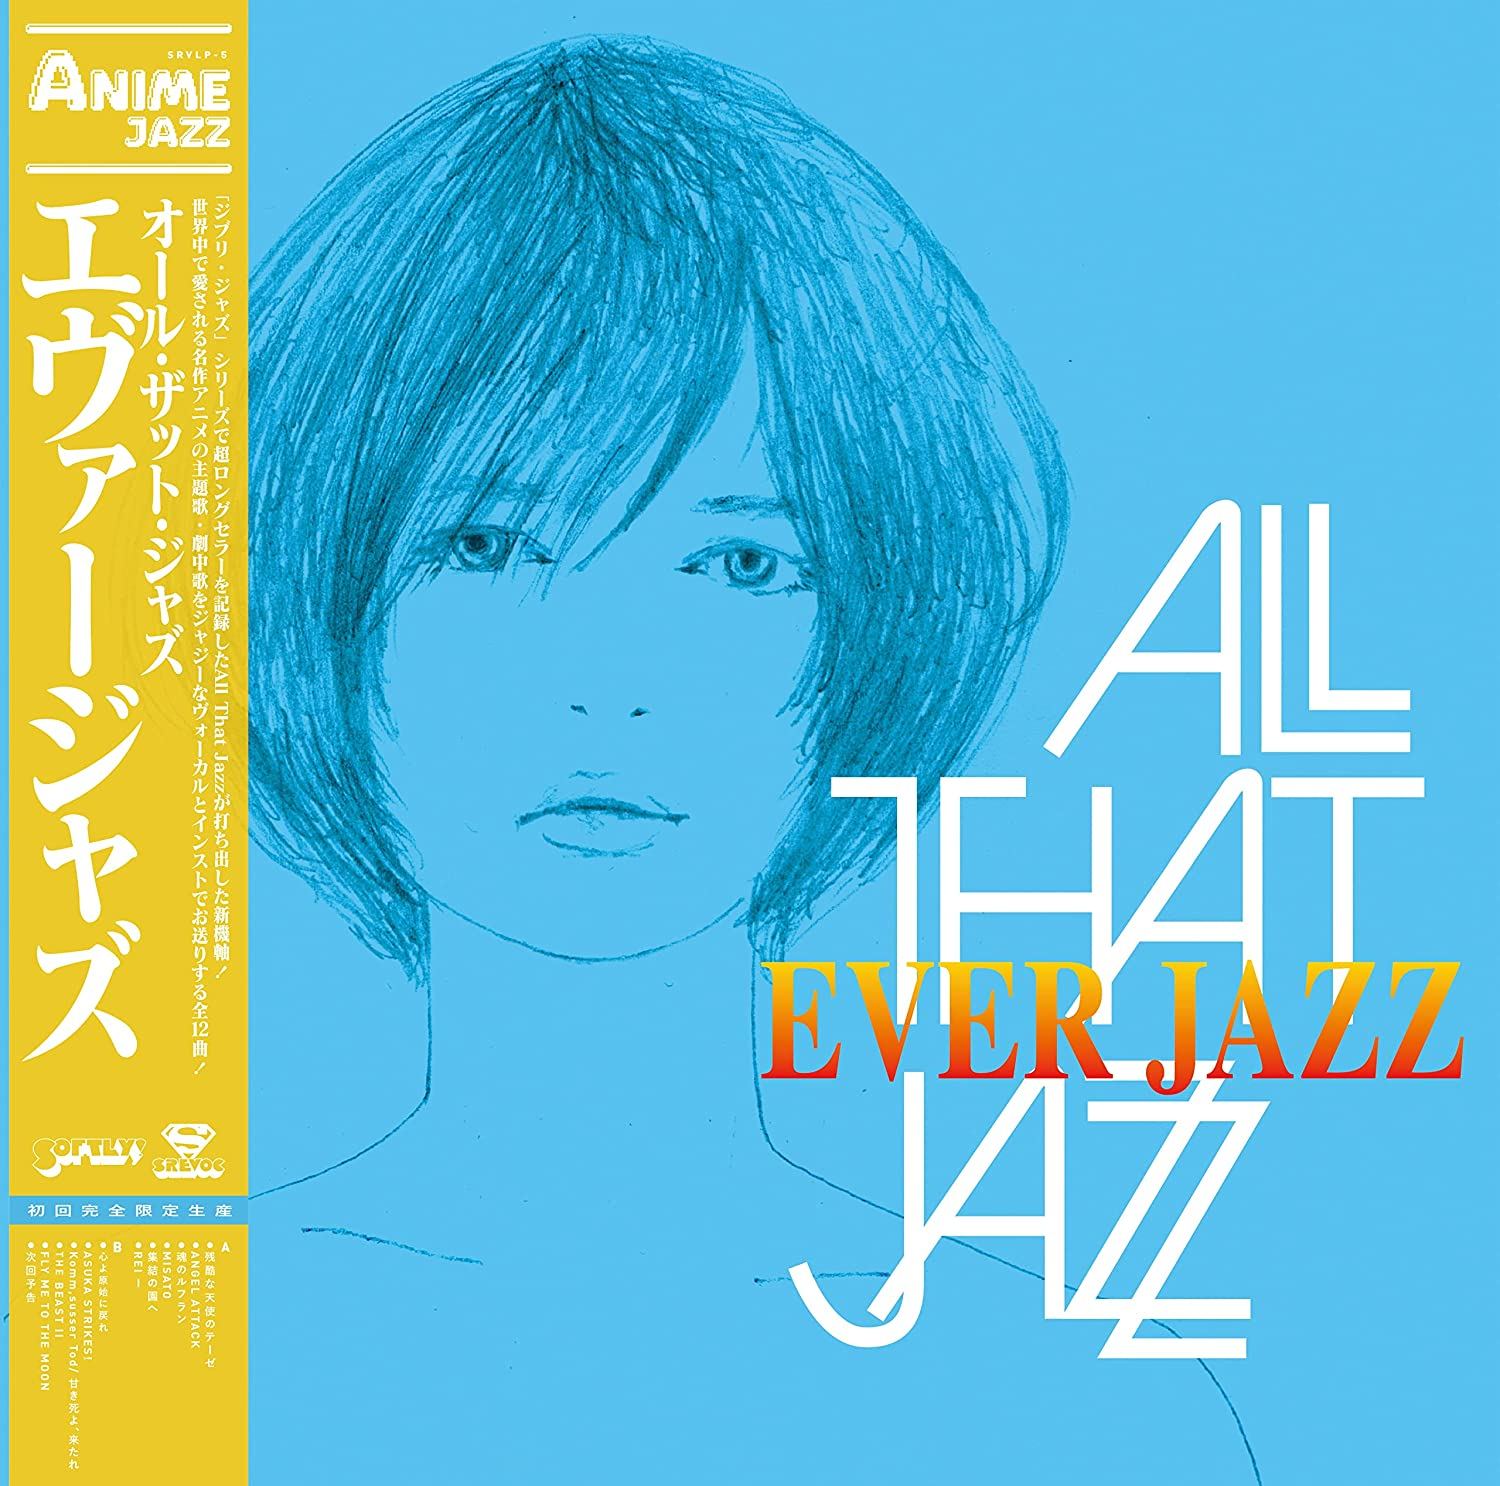 Stream Annasald  Listen to Jazz Anime Music OST playlist online for free  on SoundCloud